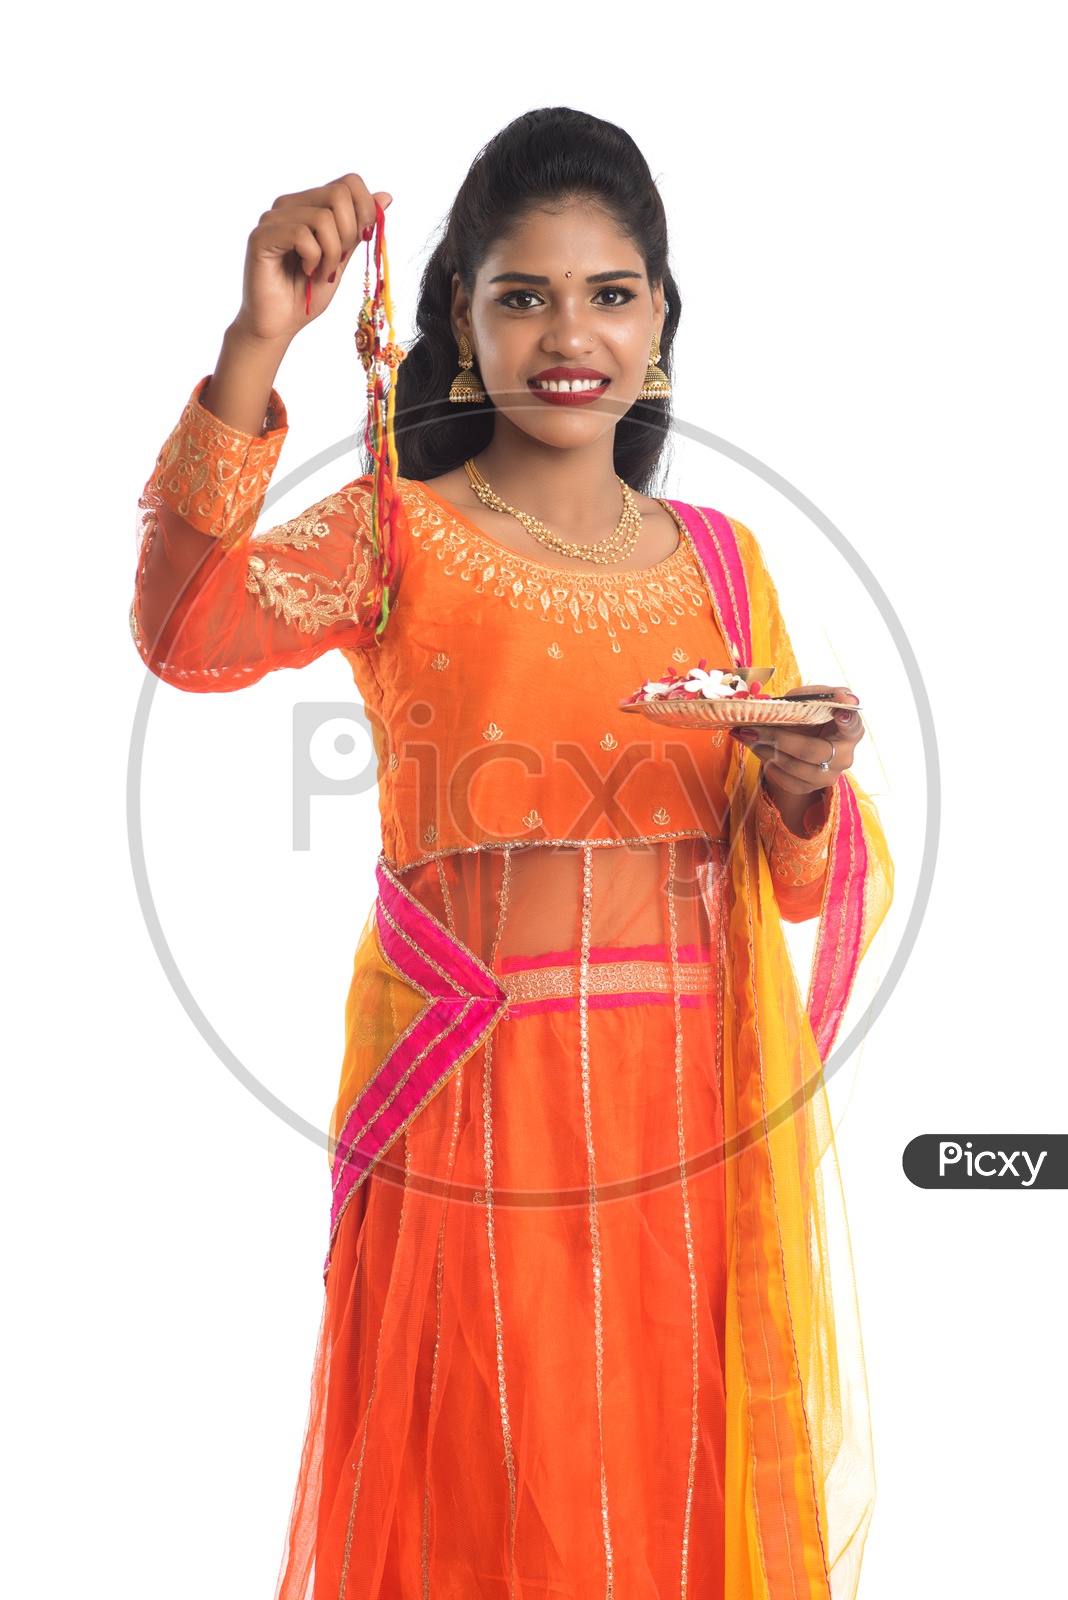 Young Indian Girl Holding Pooja Thali or Pooja Plate Along With an Elegant Rakhi For Her Brother  With a Smile Face on an Isolated White Background